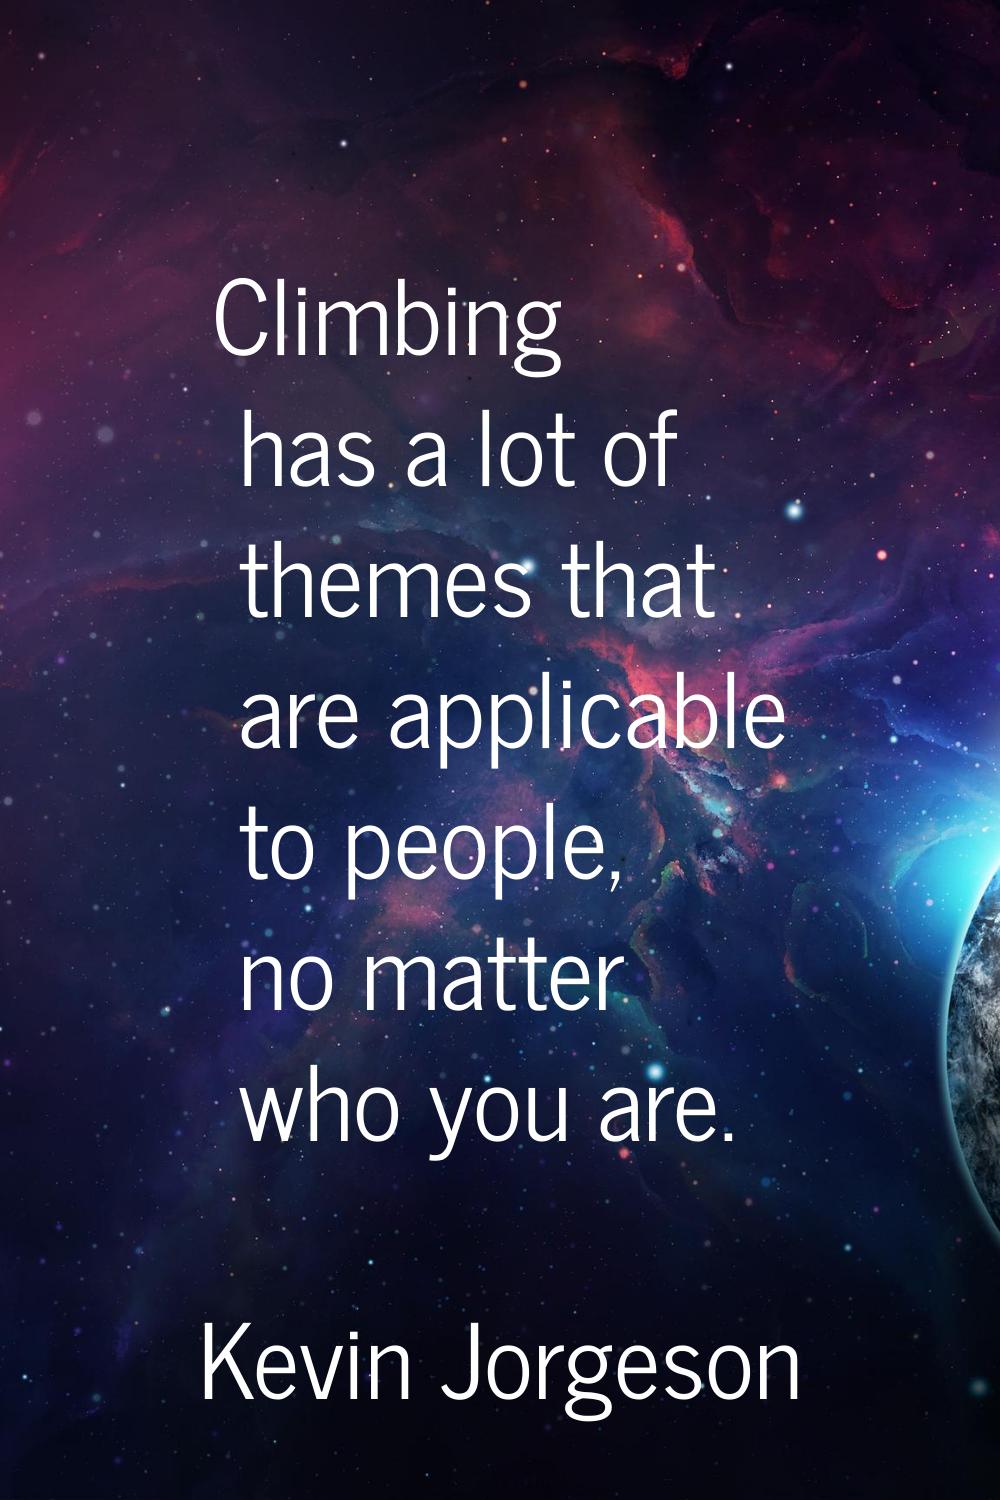 Climbing has a lot of themes that are applicable to people, no matter who you are.